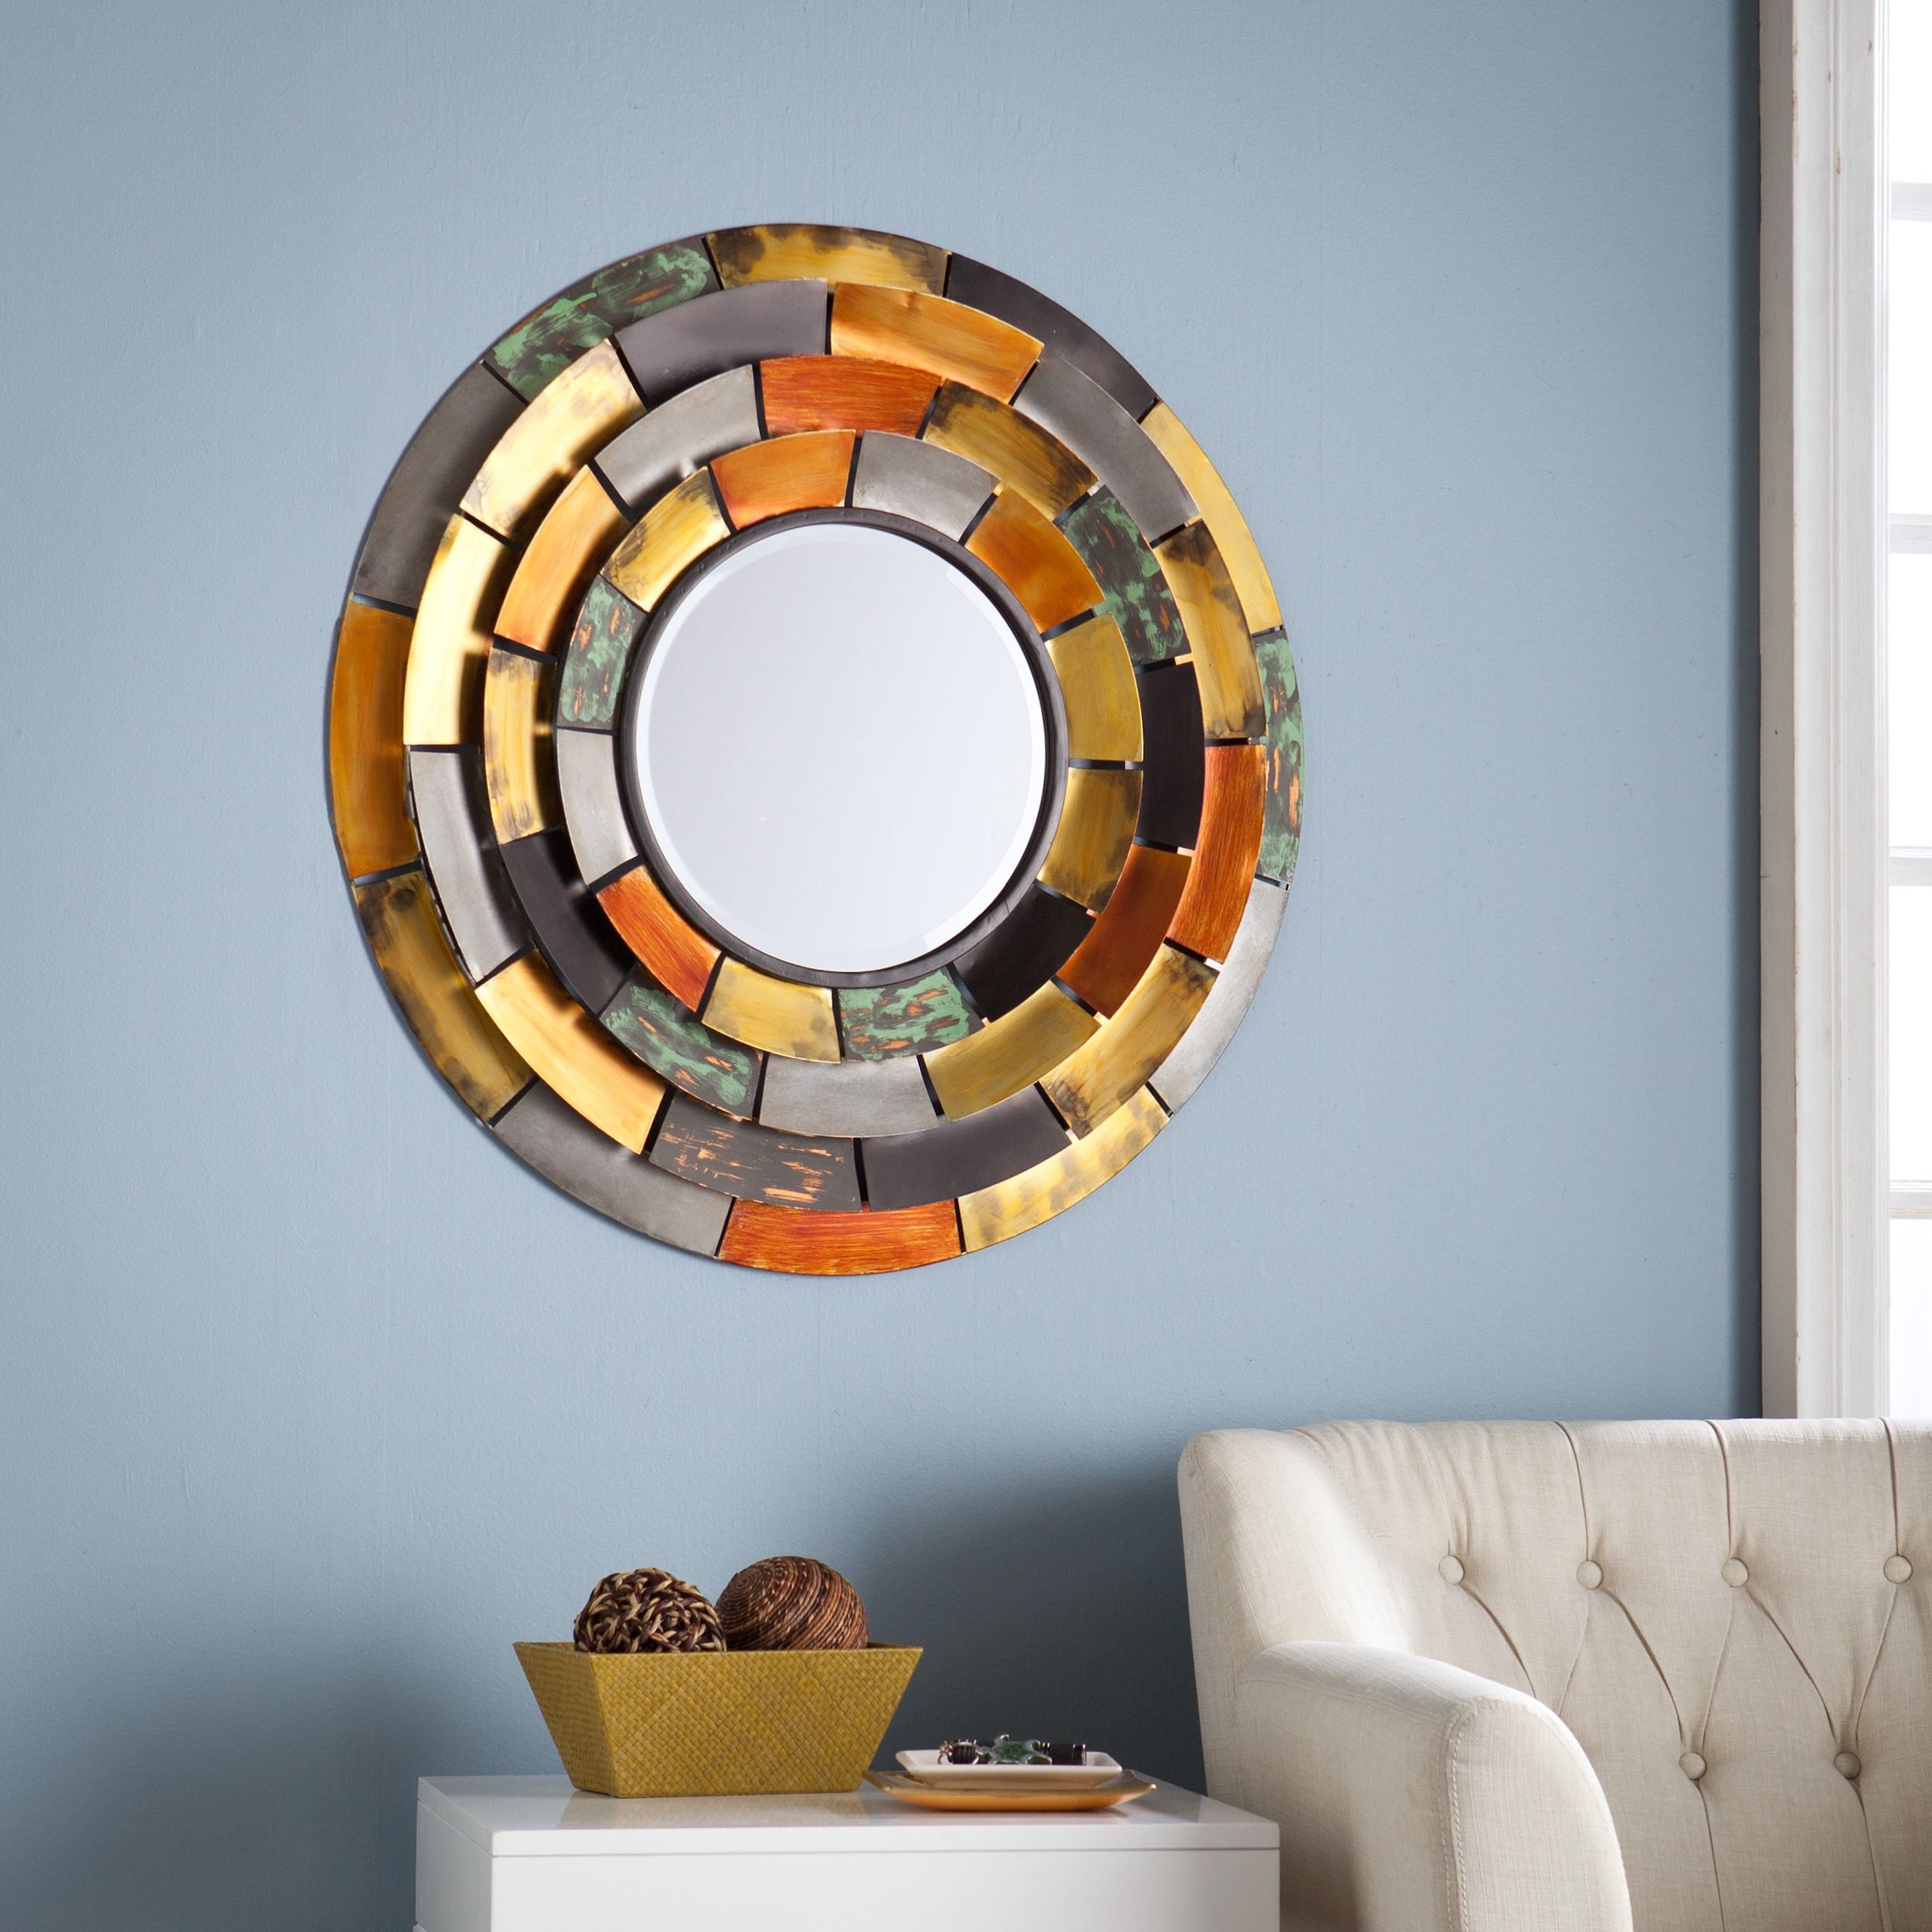 The Curated Nomad Lotta Decorative Wall Mirror With Tiered Edges | Ebay Pertaining To Reba Accent Wall Mirrors (View 15 of 15)